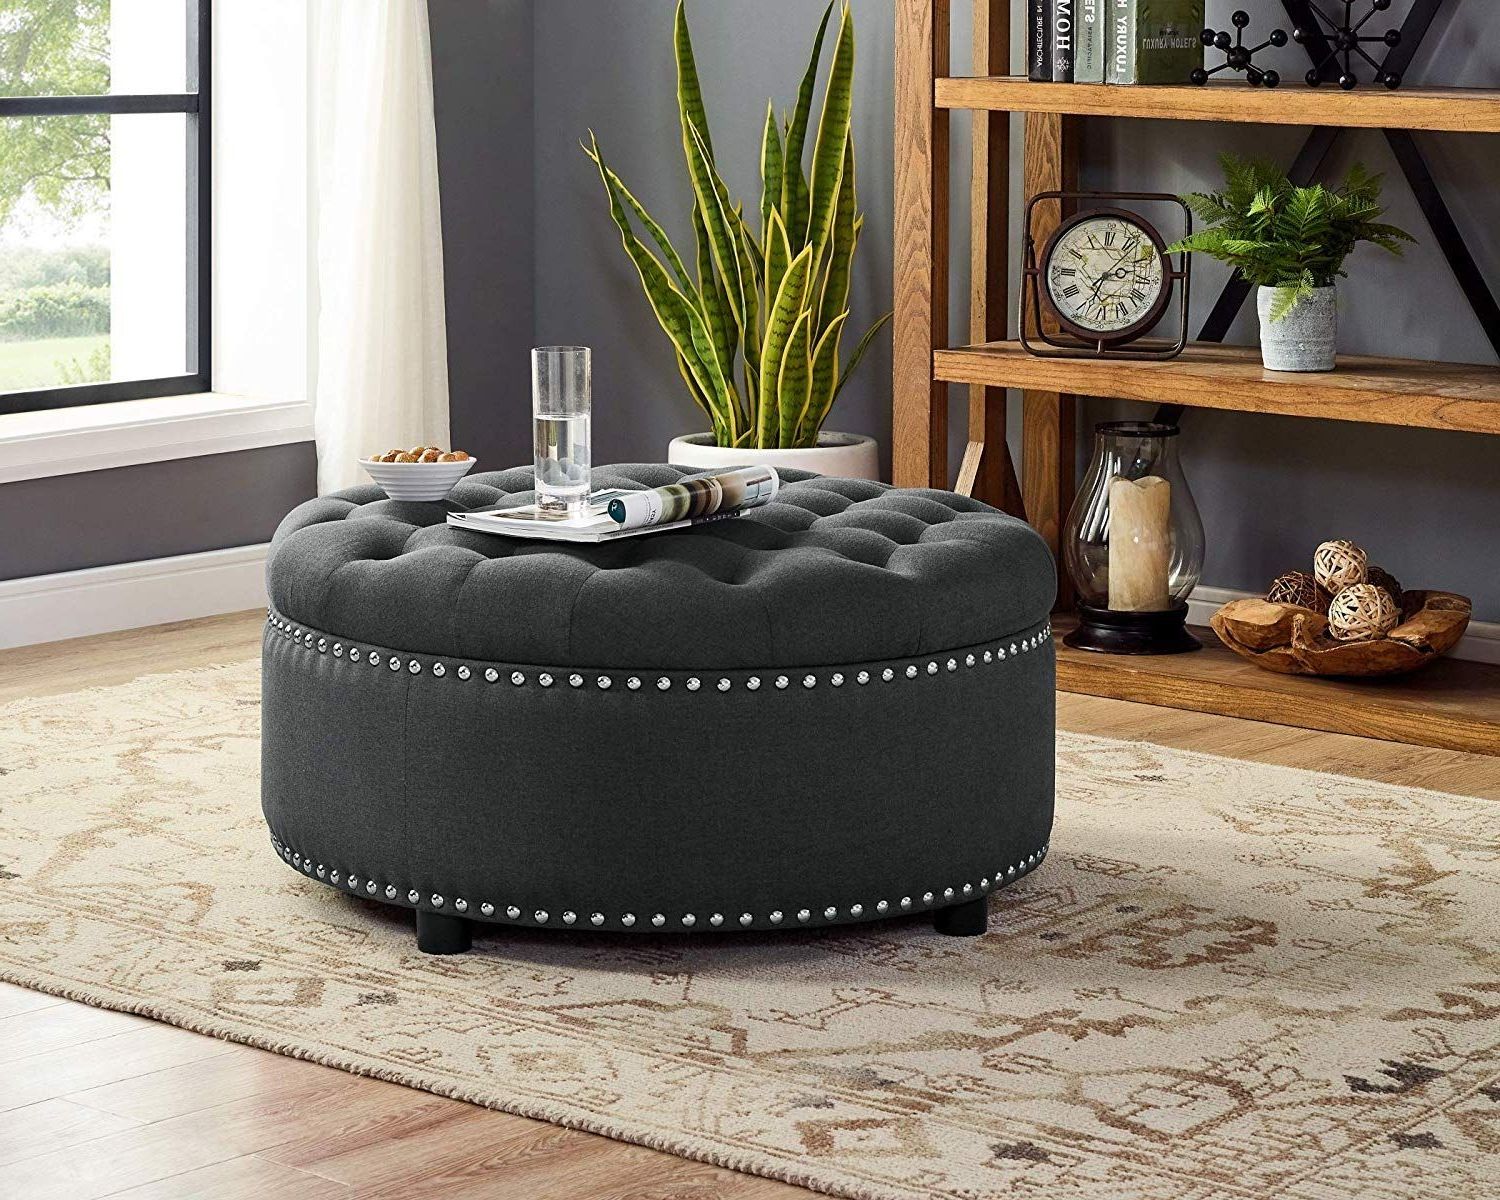 Lavender Fabric Storage Ottomans Intended For 2017 Dazone Round Storage Ottoman, Fabric Upholstered Nailhead Studded (View 6 of 10)